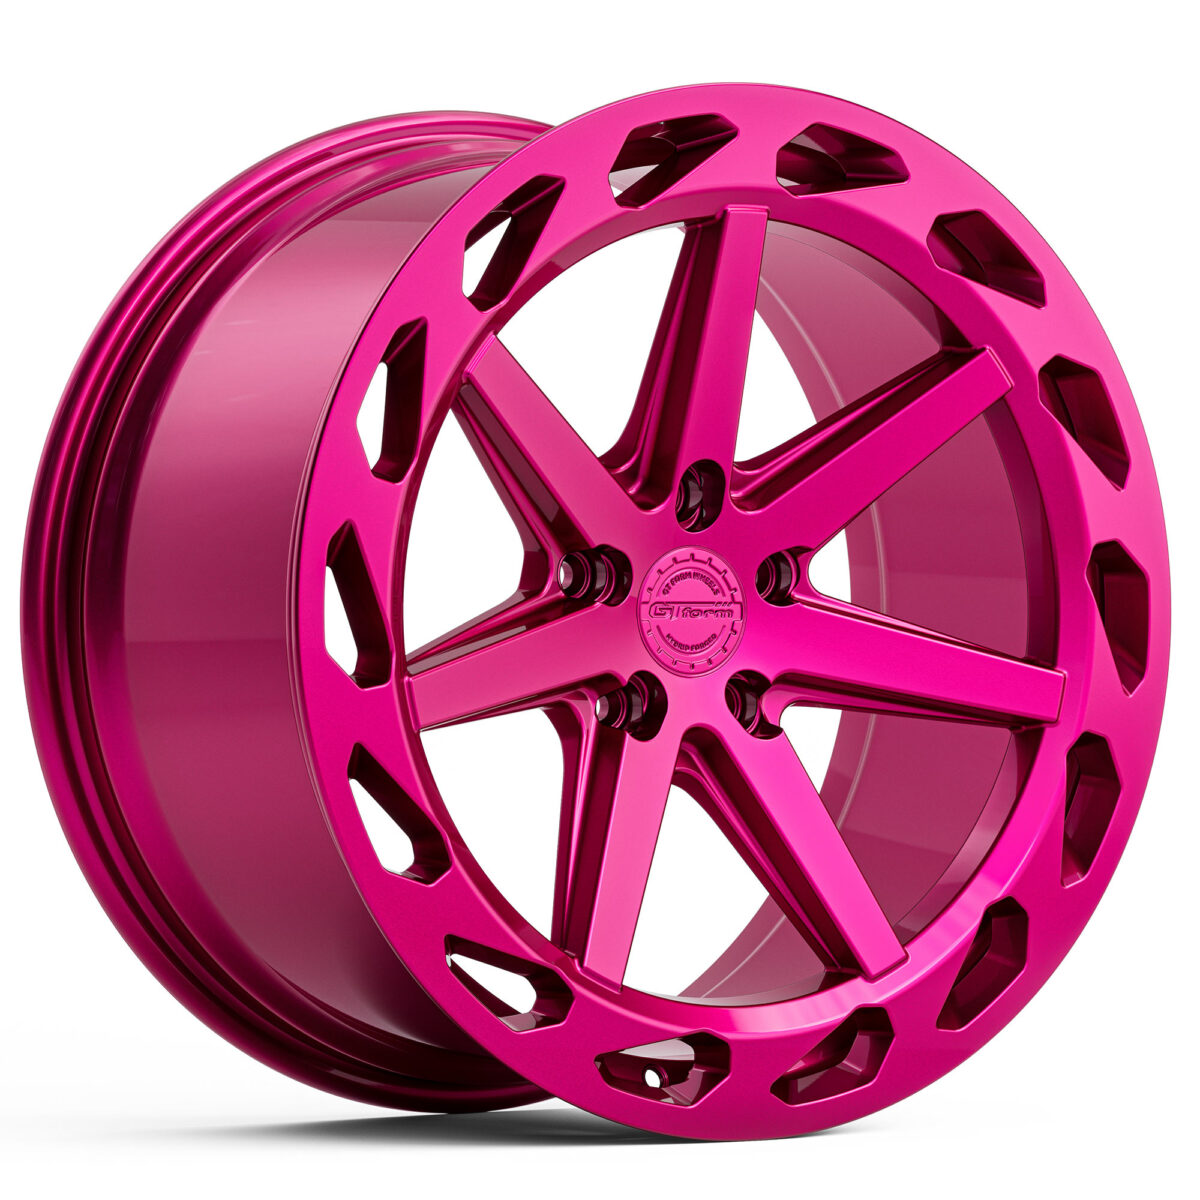 PERFORMANCE WHEELS GT FORM HF4.1 HYBRID FORGED ILLISION PINK 20X9 20X10 20X11 STAGGERED RIMS